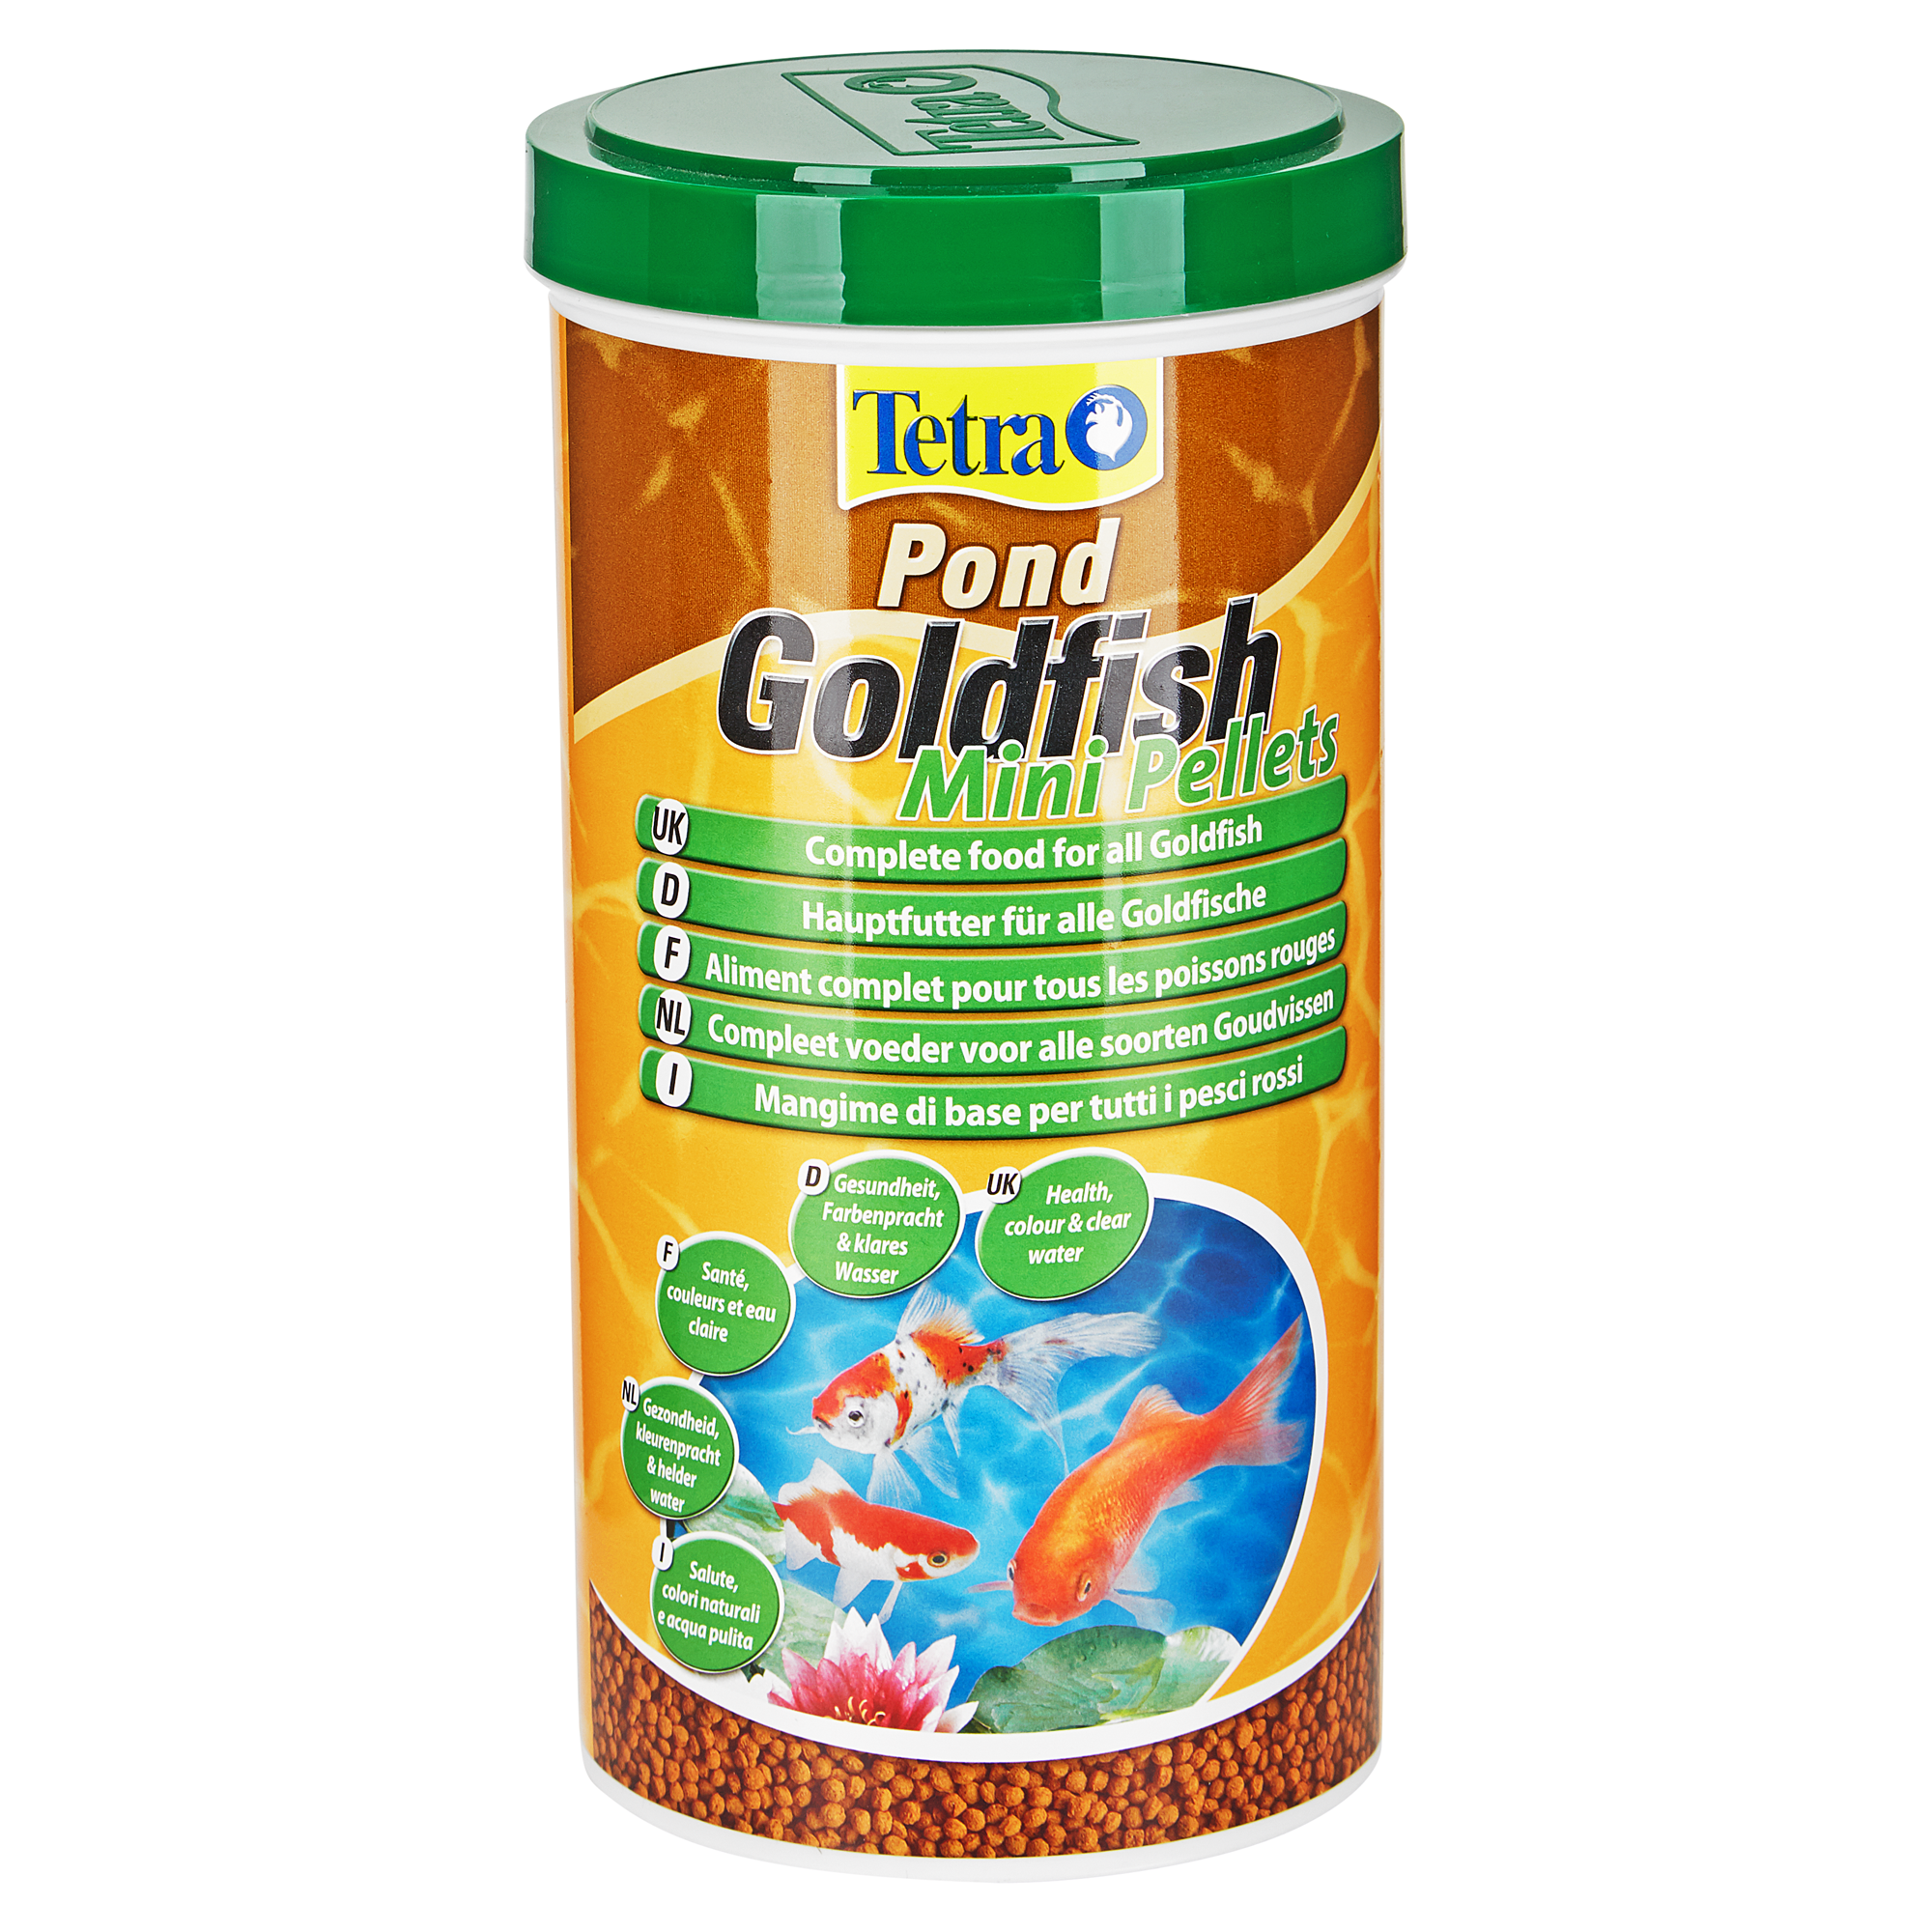 Fischfutter "Pond" Goldfish Mini Pellets 350 g + product picture